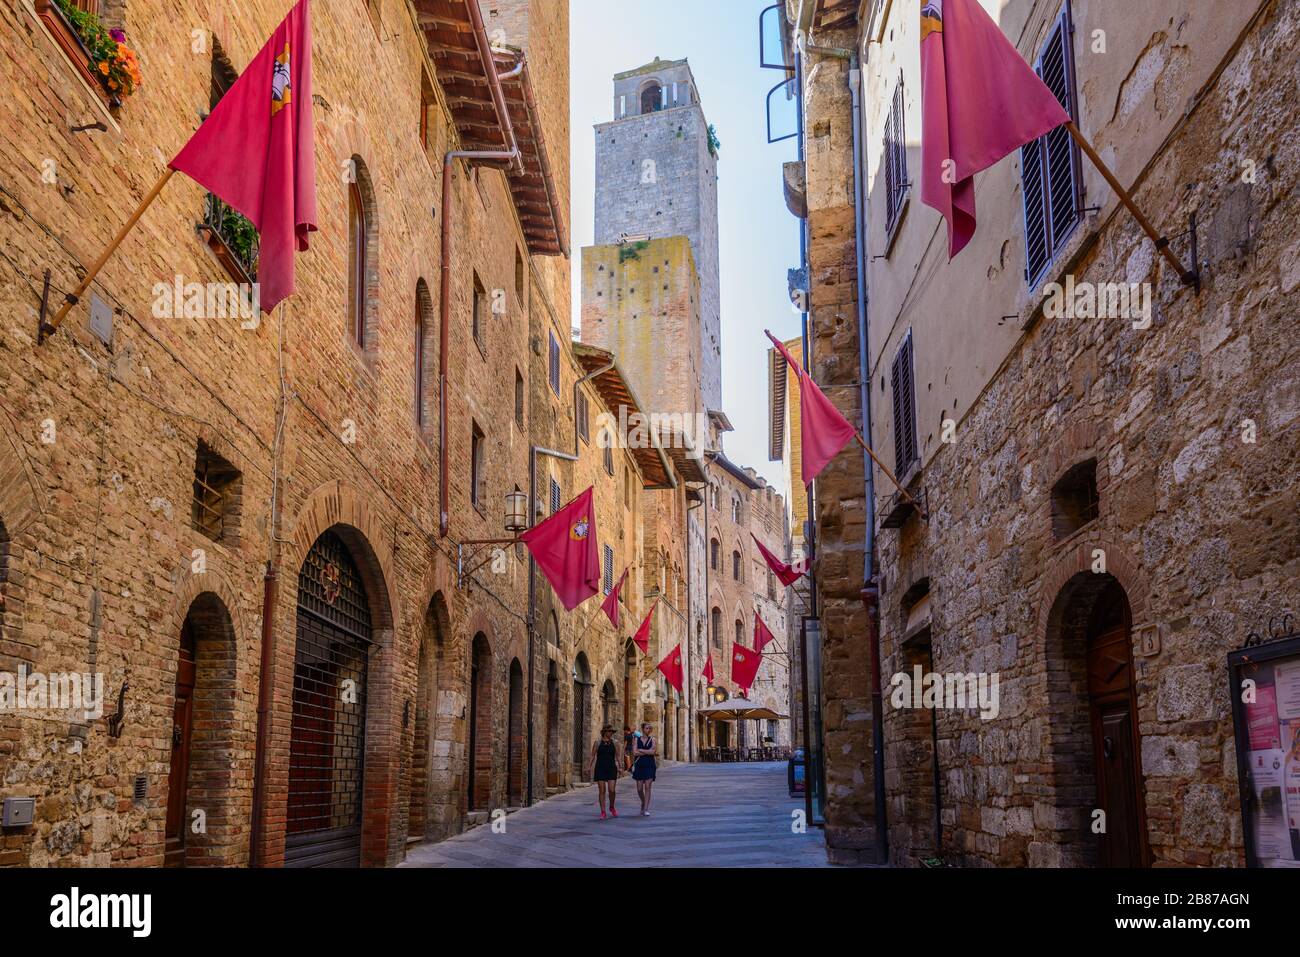 Two women walking down Via S. Matteo street with red flags flying on the walls in the historic centre of San Gimignano, Province of Siena, Italy. Stock Photo